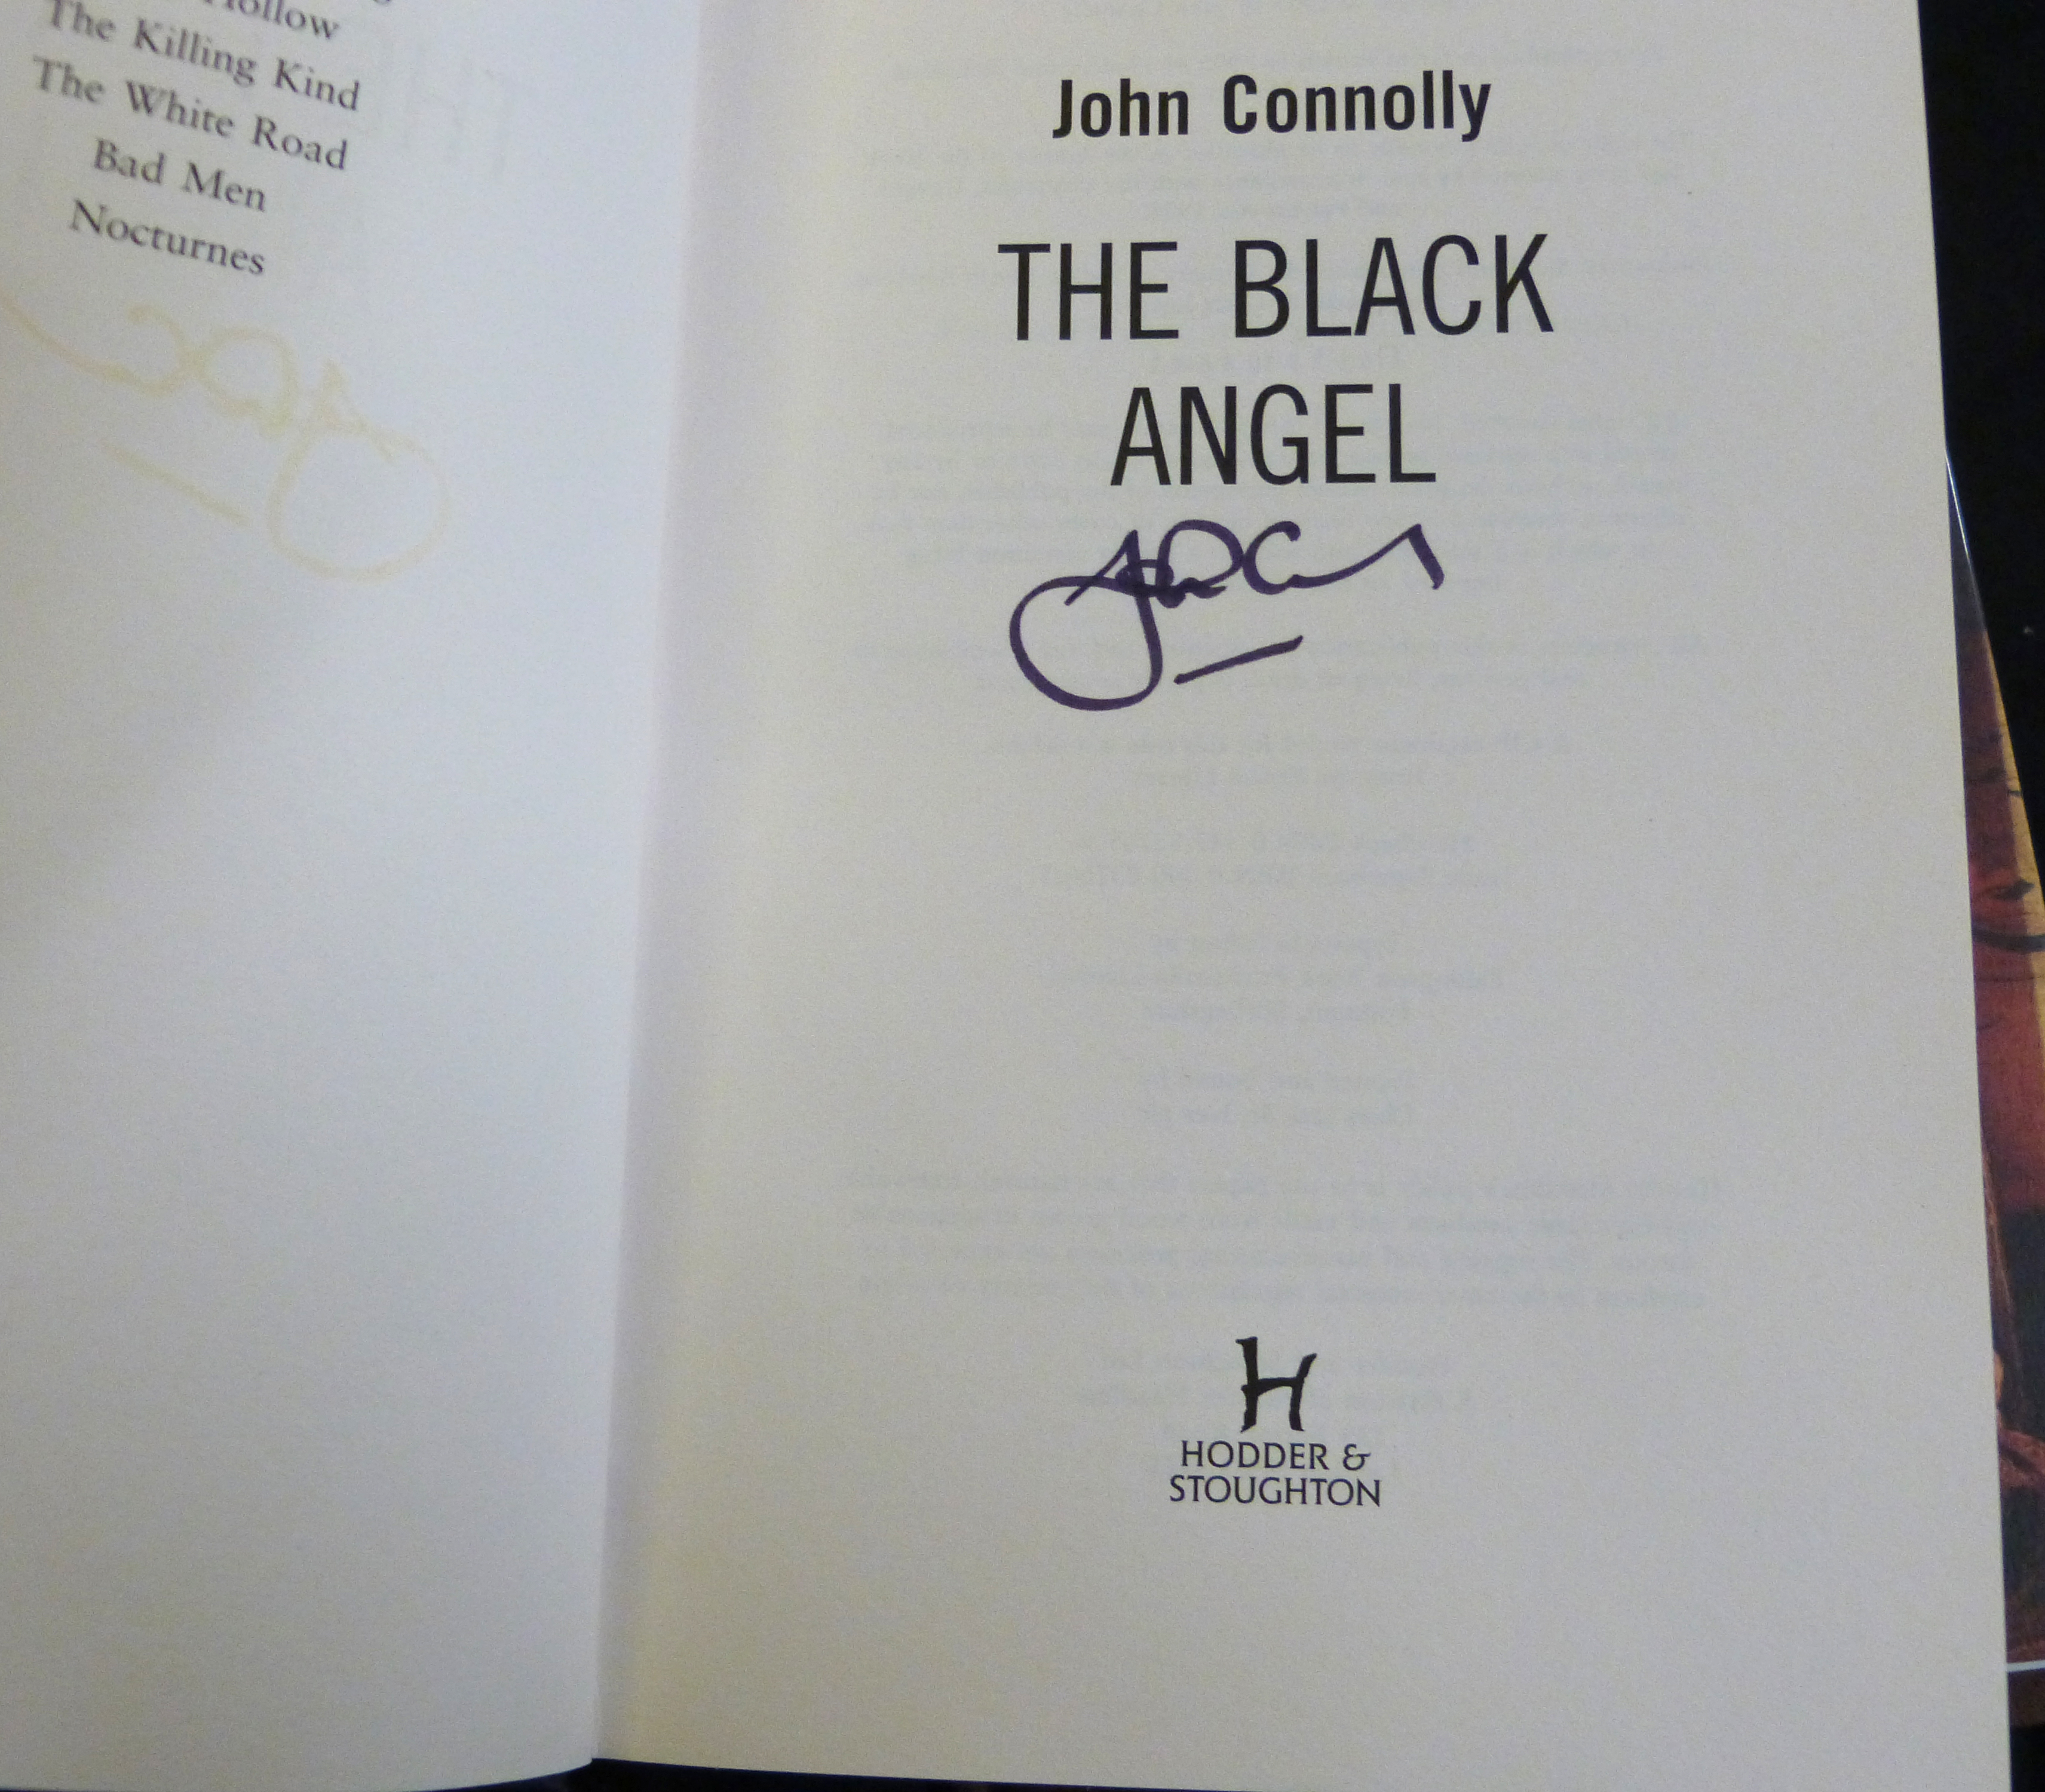 JOHN CONNOLLY: THE BLACK ANGEL, London, Hodder & Stoughton, 2005, 1st edition, signed with - Image 4 of 4